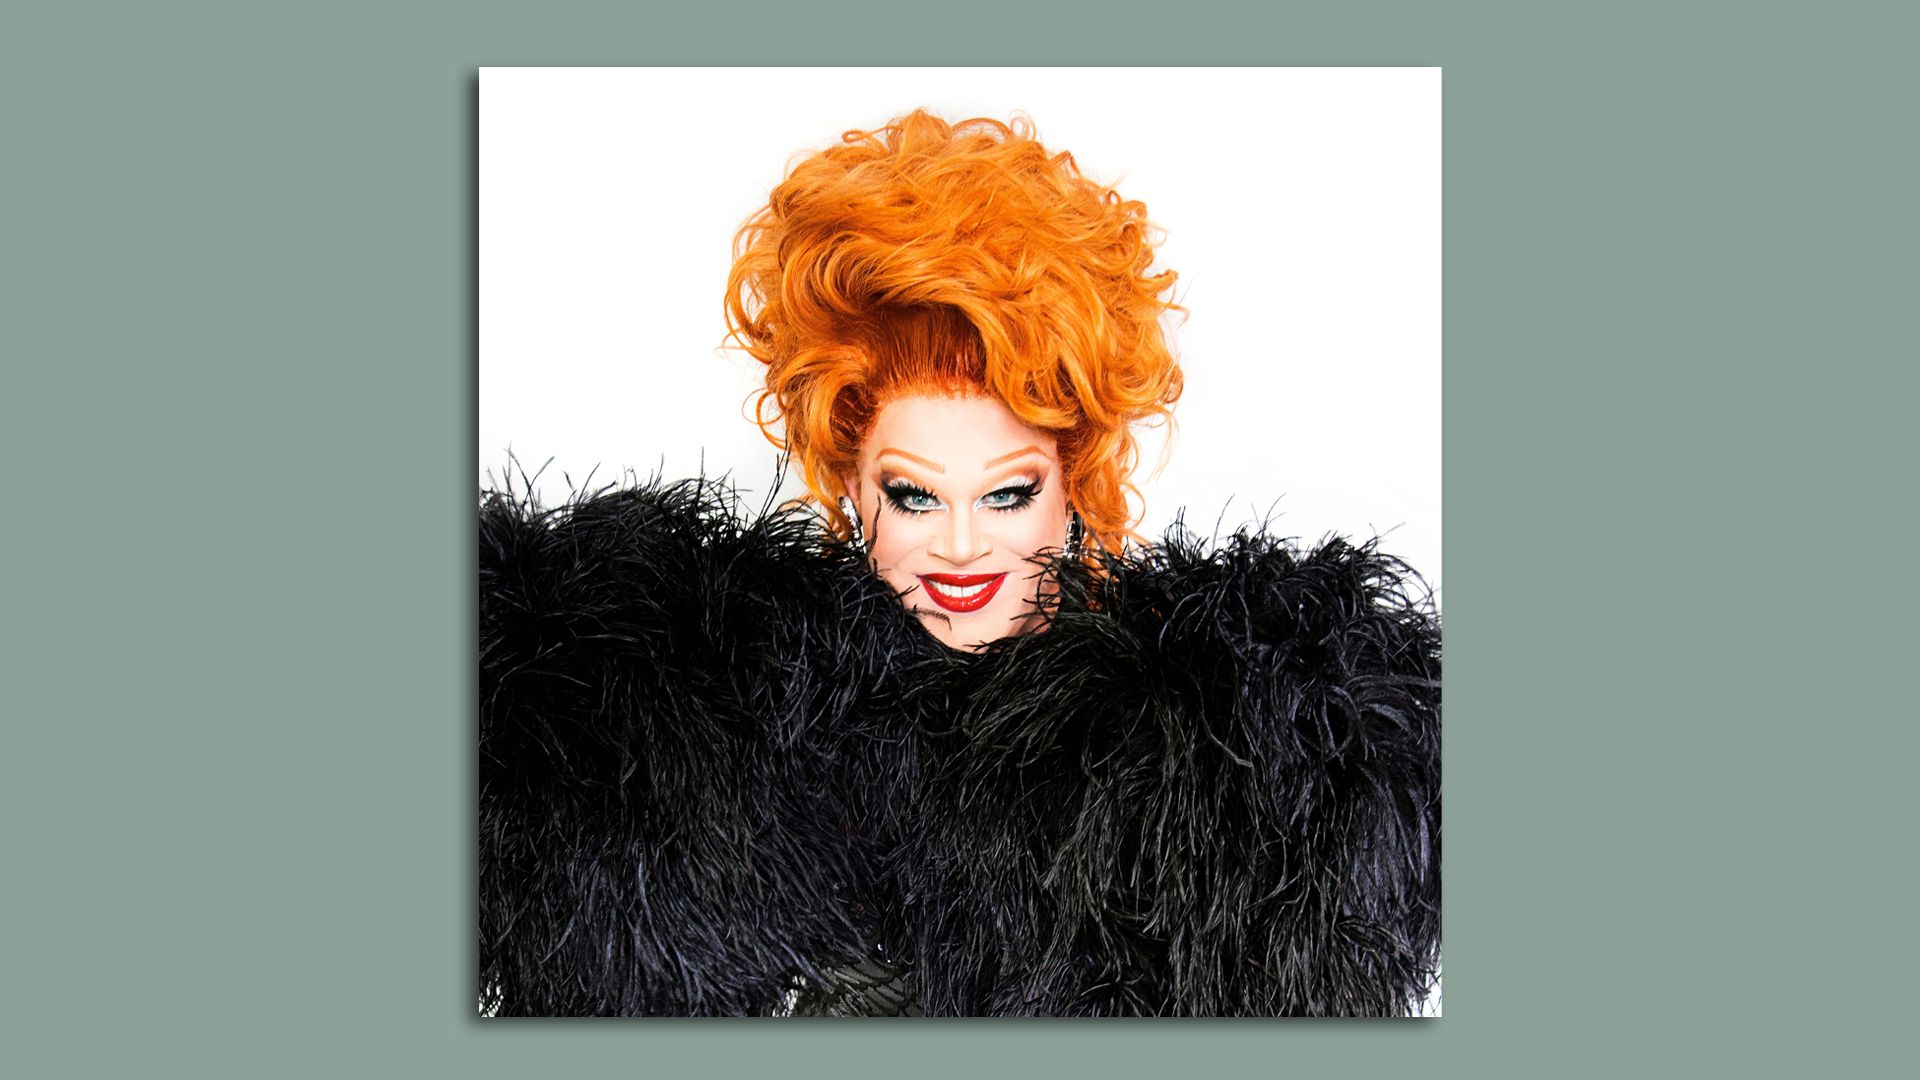 A photo of Nina West with orange hair and black feathers from the top of a dress surrounding her face